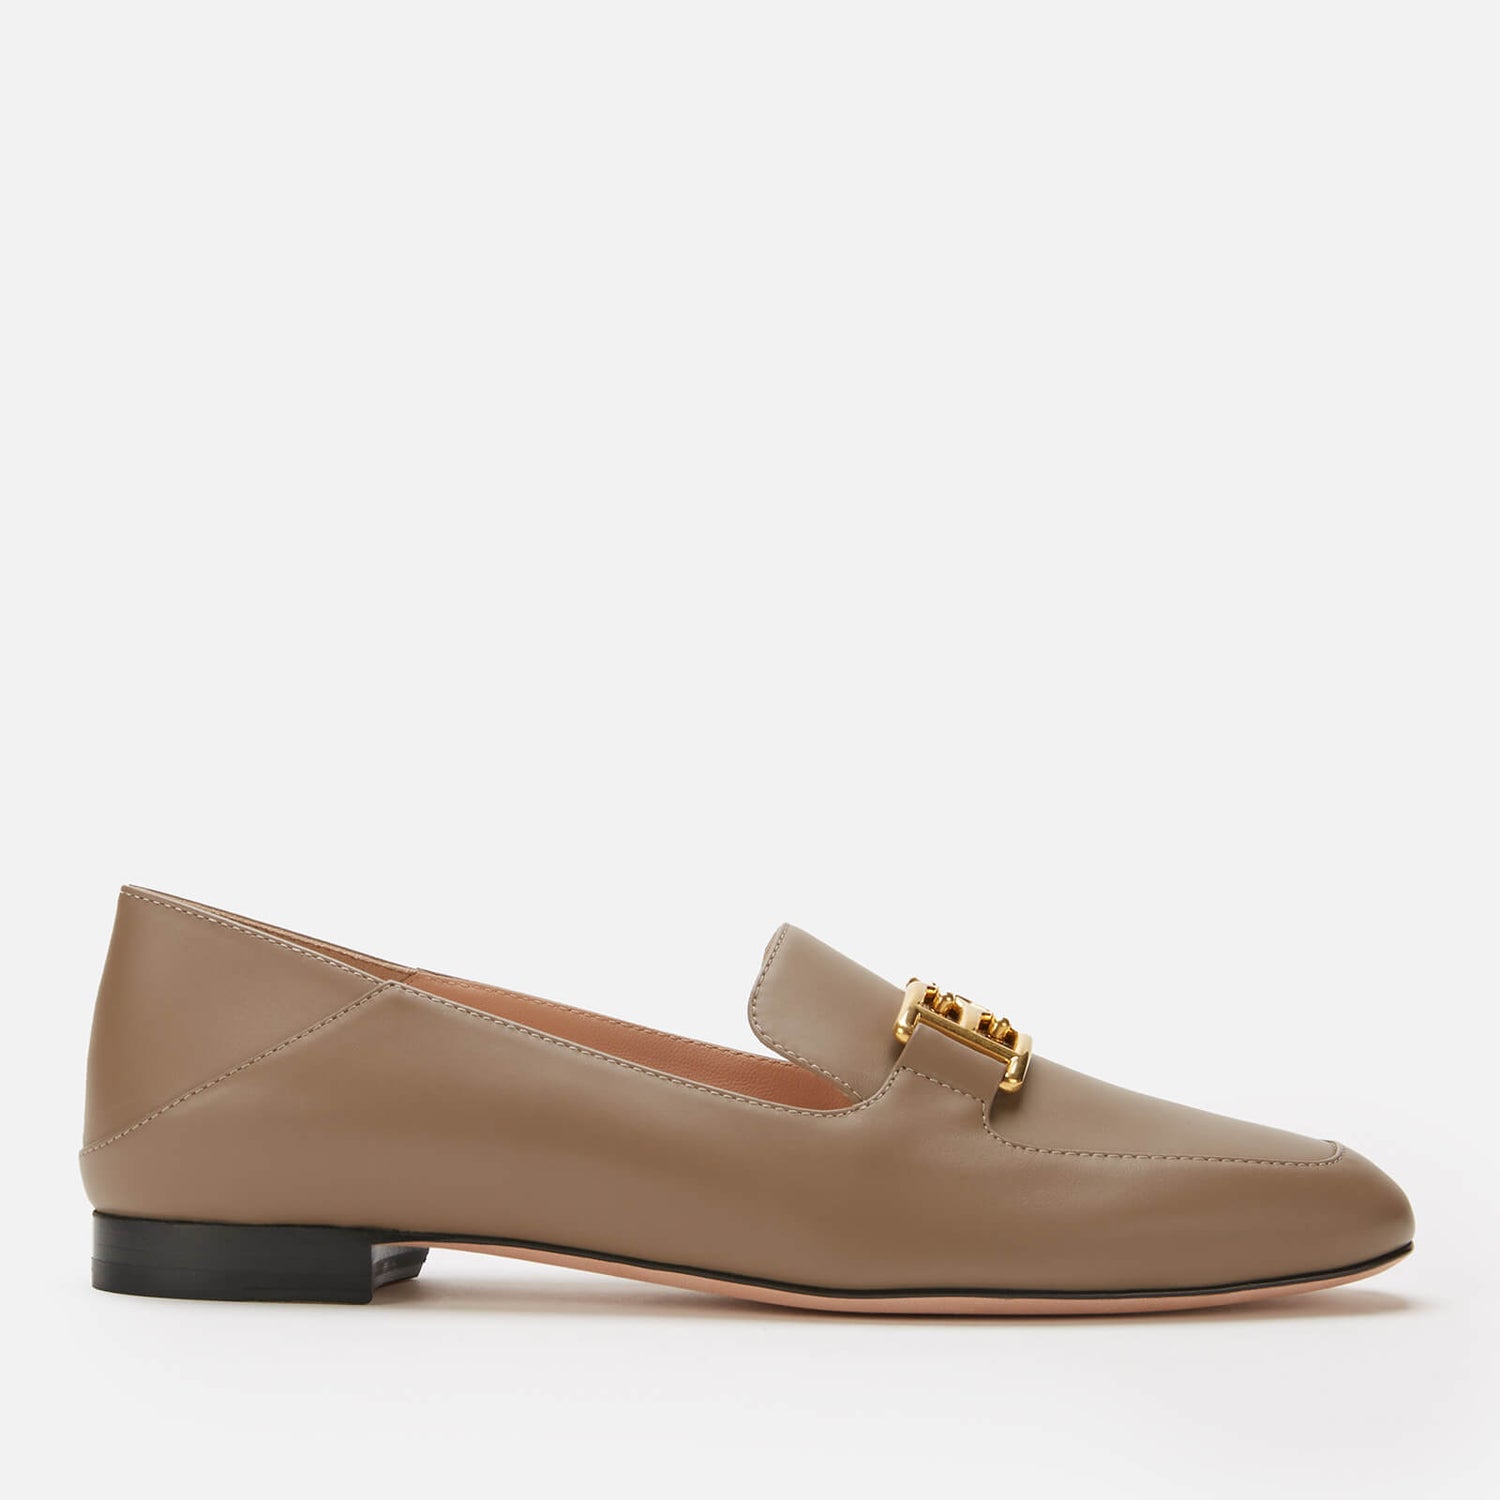 Bally Women's Ellah Leather Loafers - Canapa - UK 3